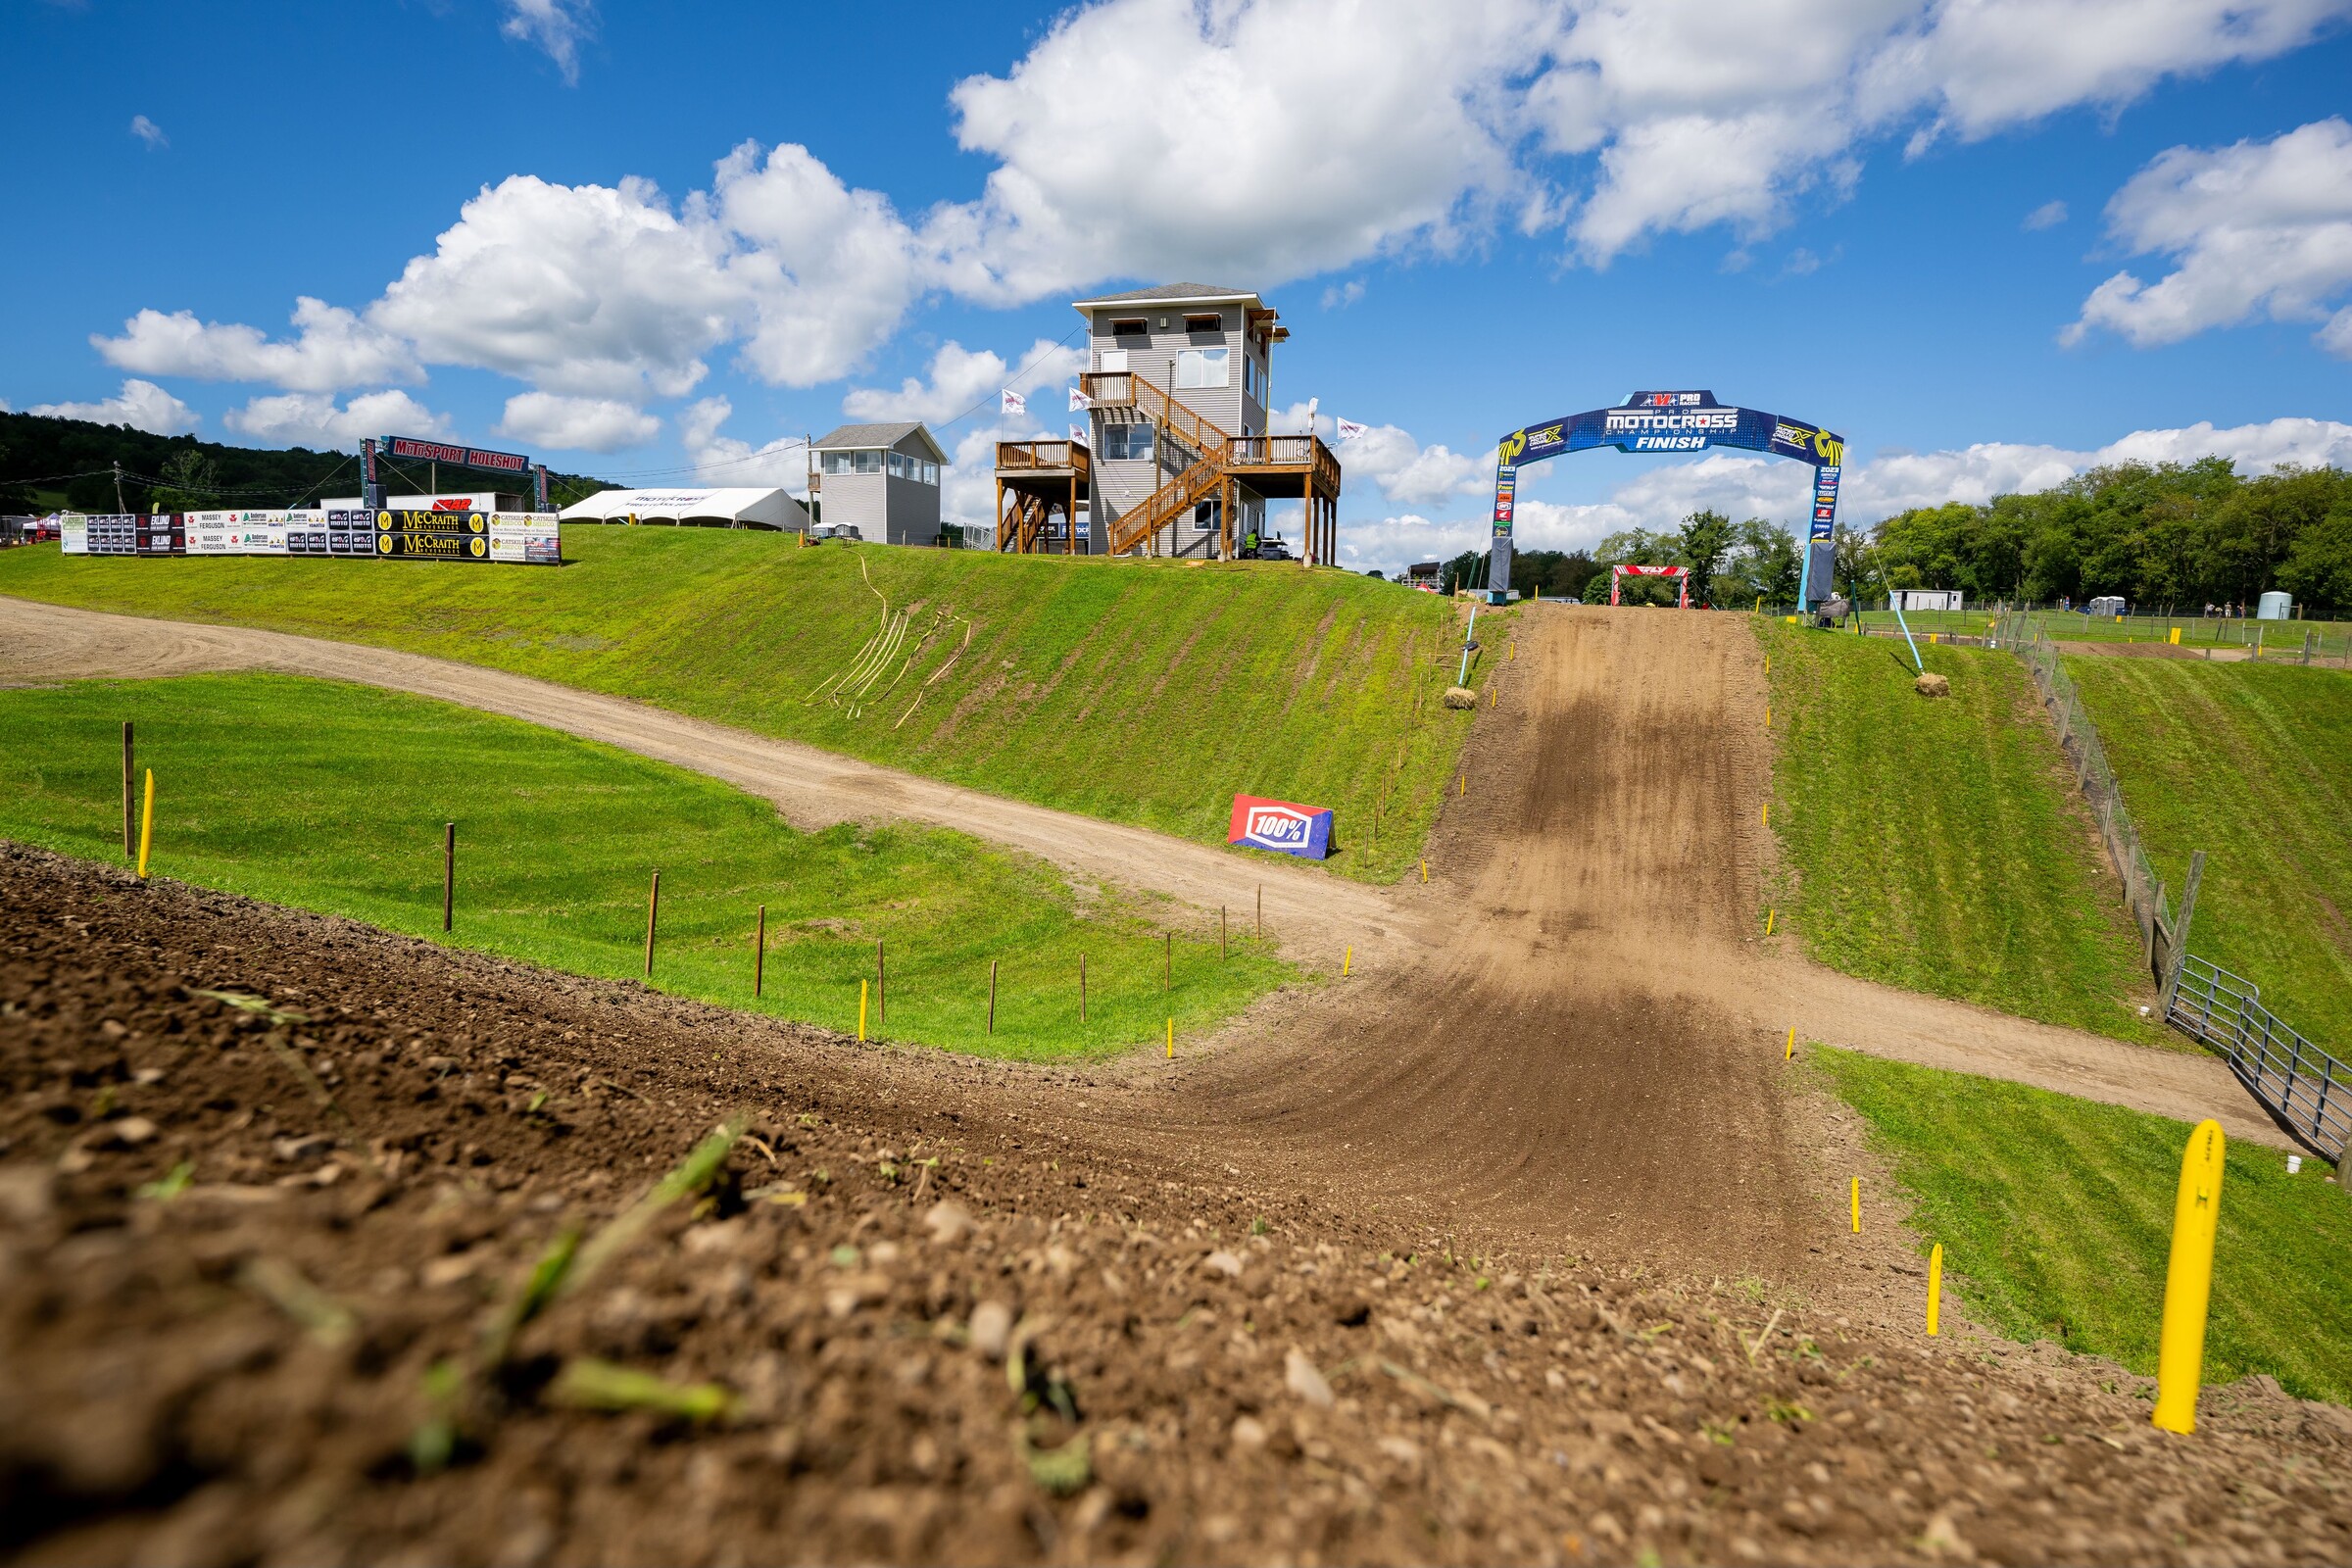 Pro Motocross Returns After Break in Action for Loretta Lynns image picture